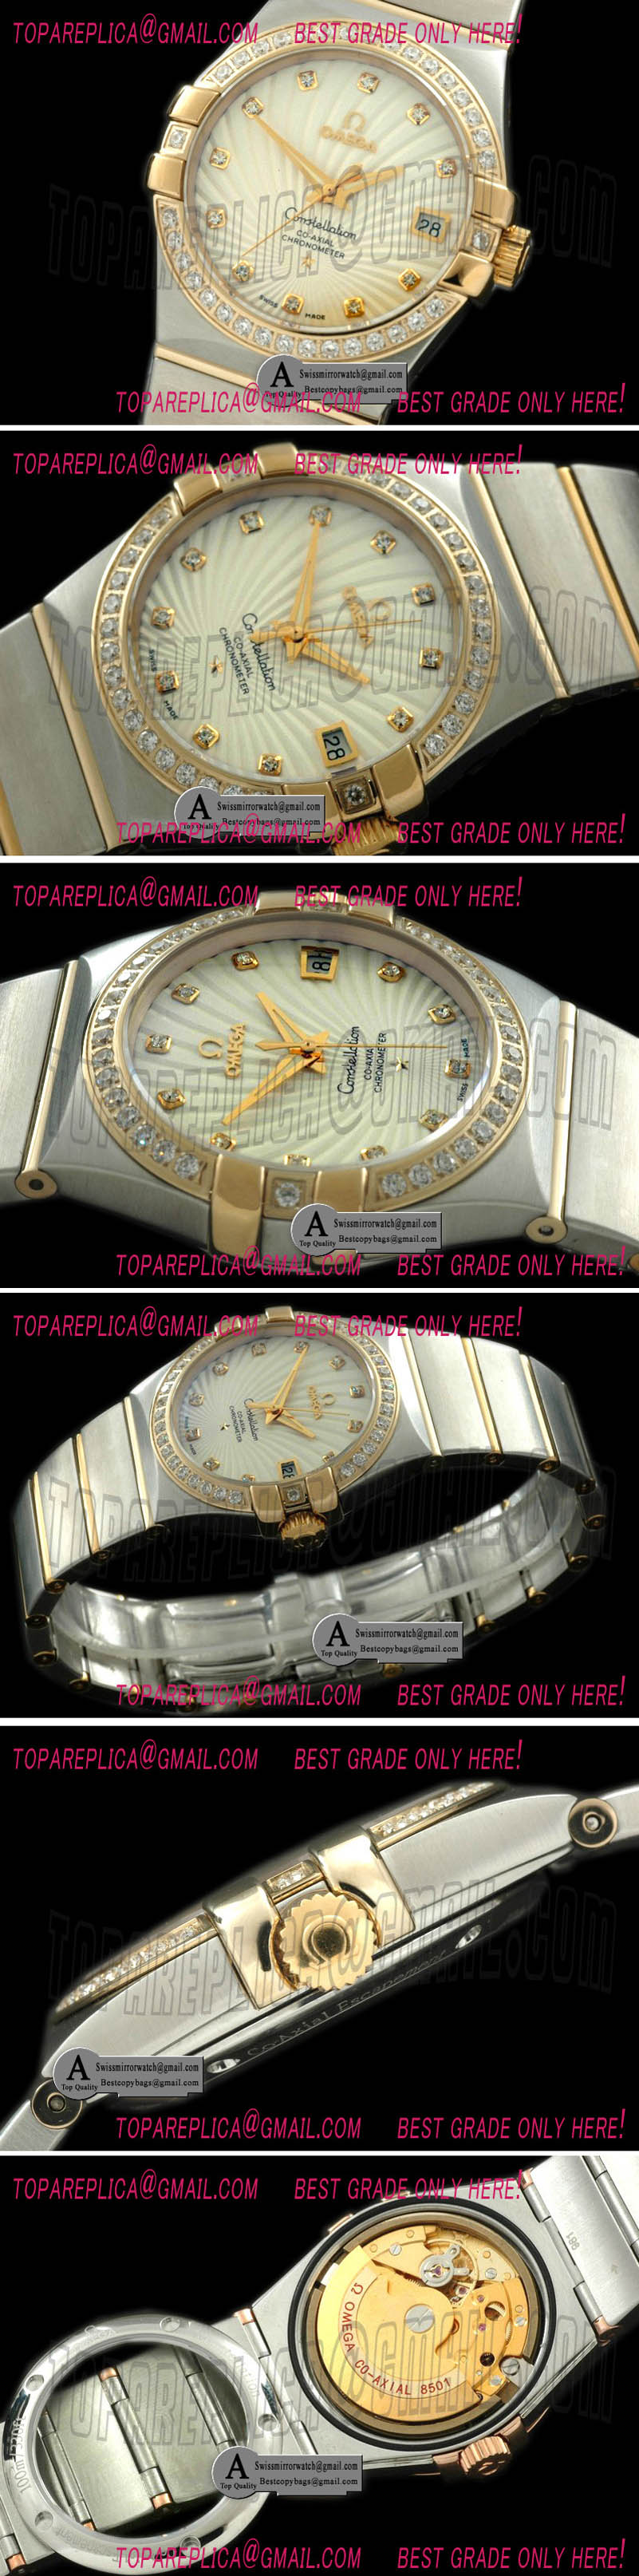 Omega Double Eagle Midsize Automatic SS/Yellow Gold/Diamond White Dial A-2813 Replica Watches